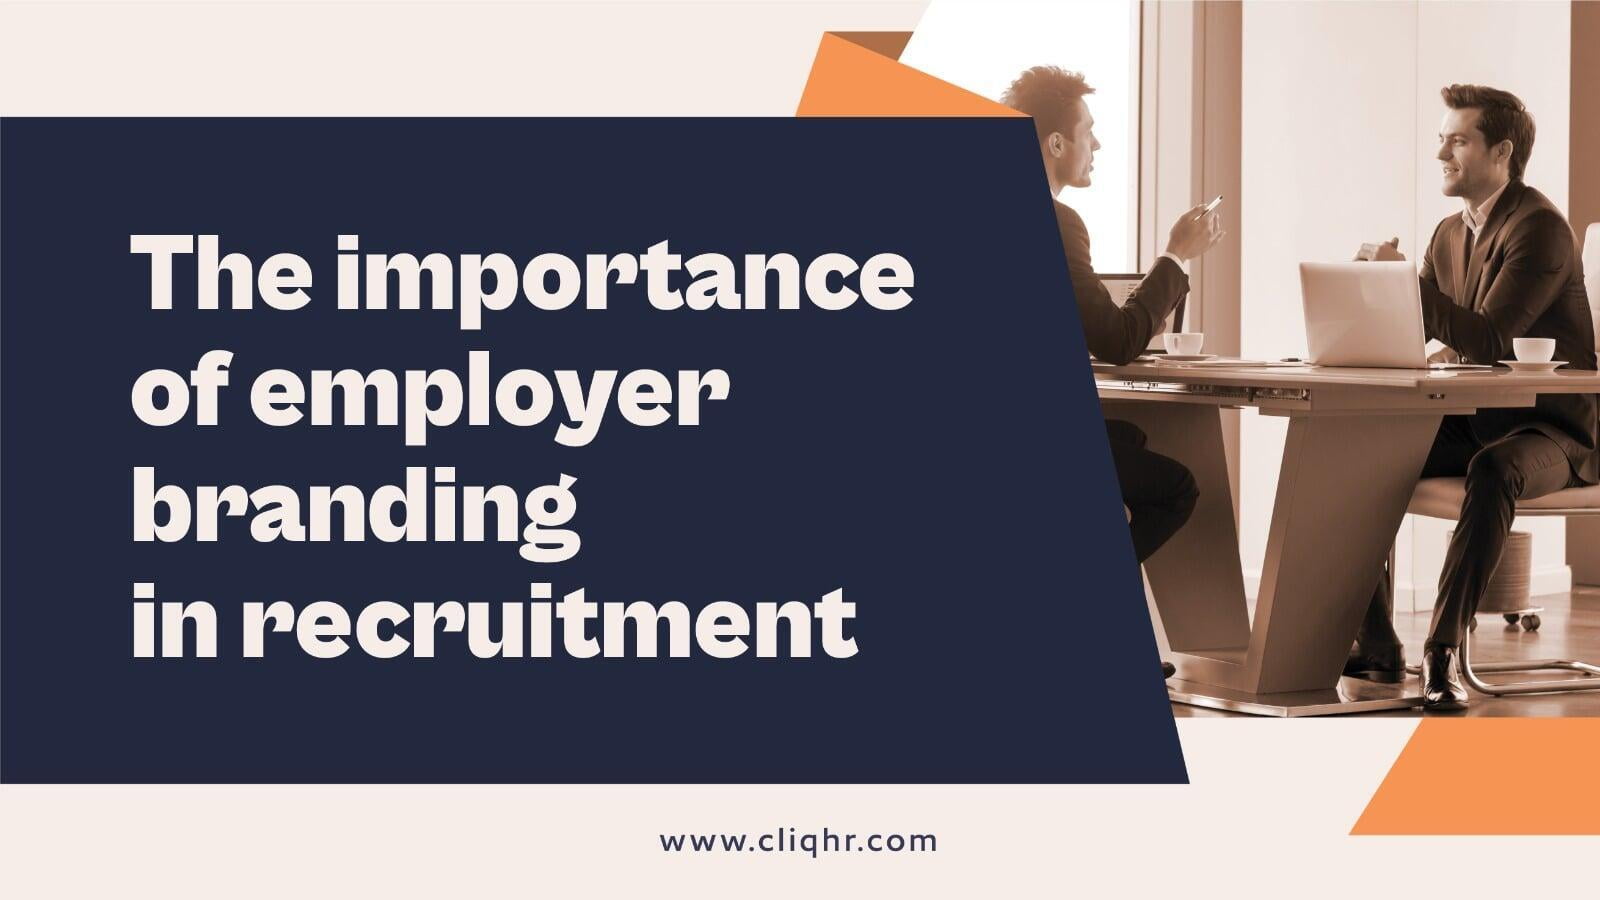 The importance of employer branding in recruitment